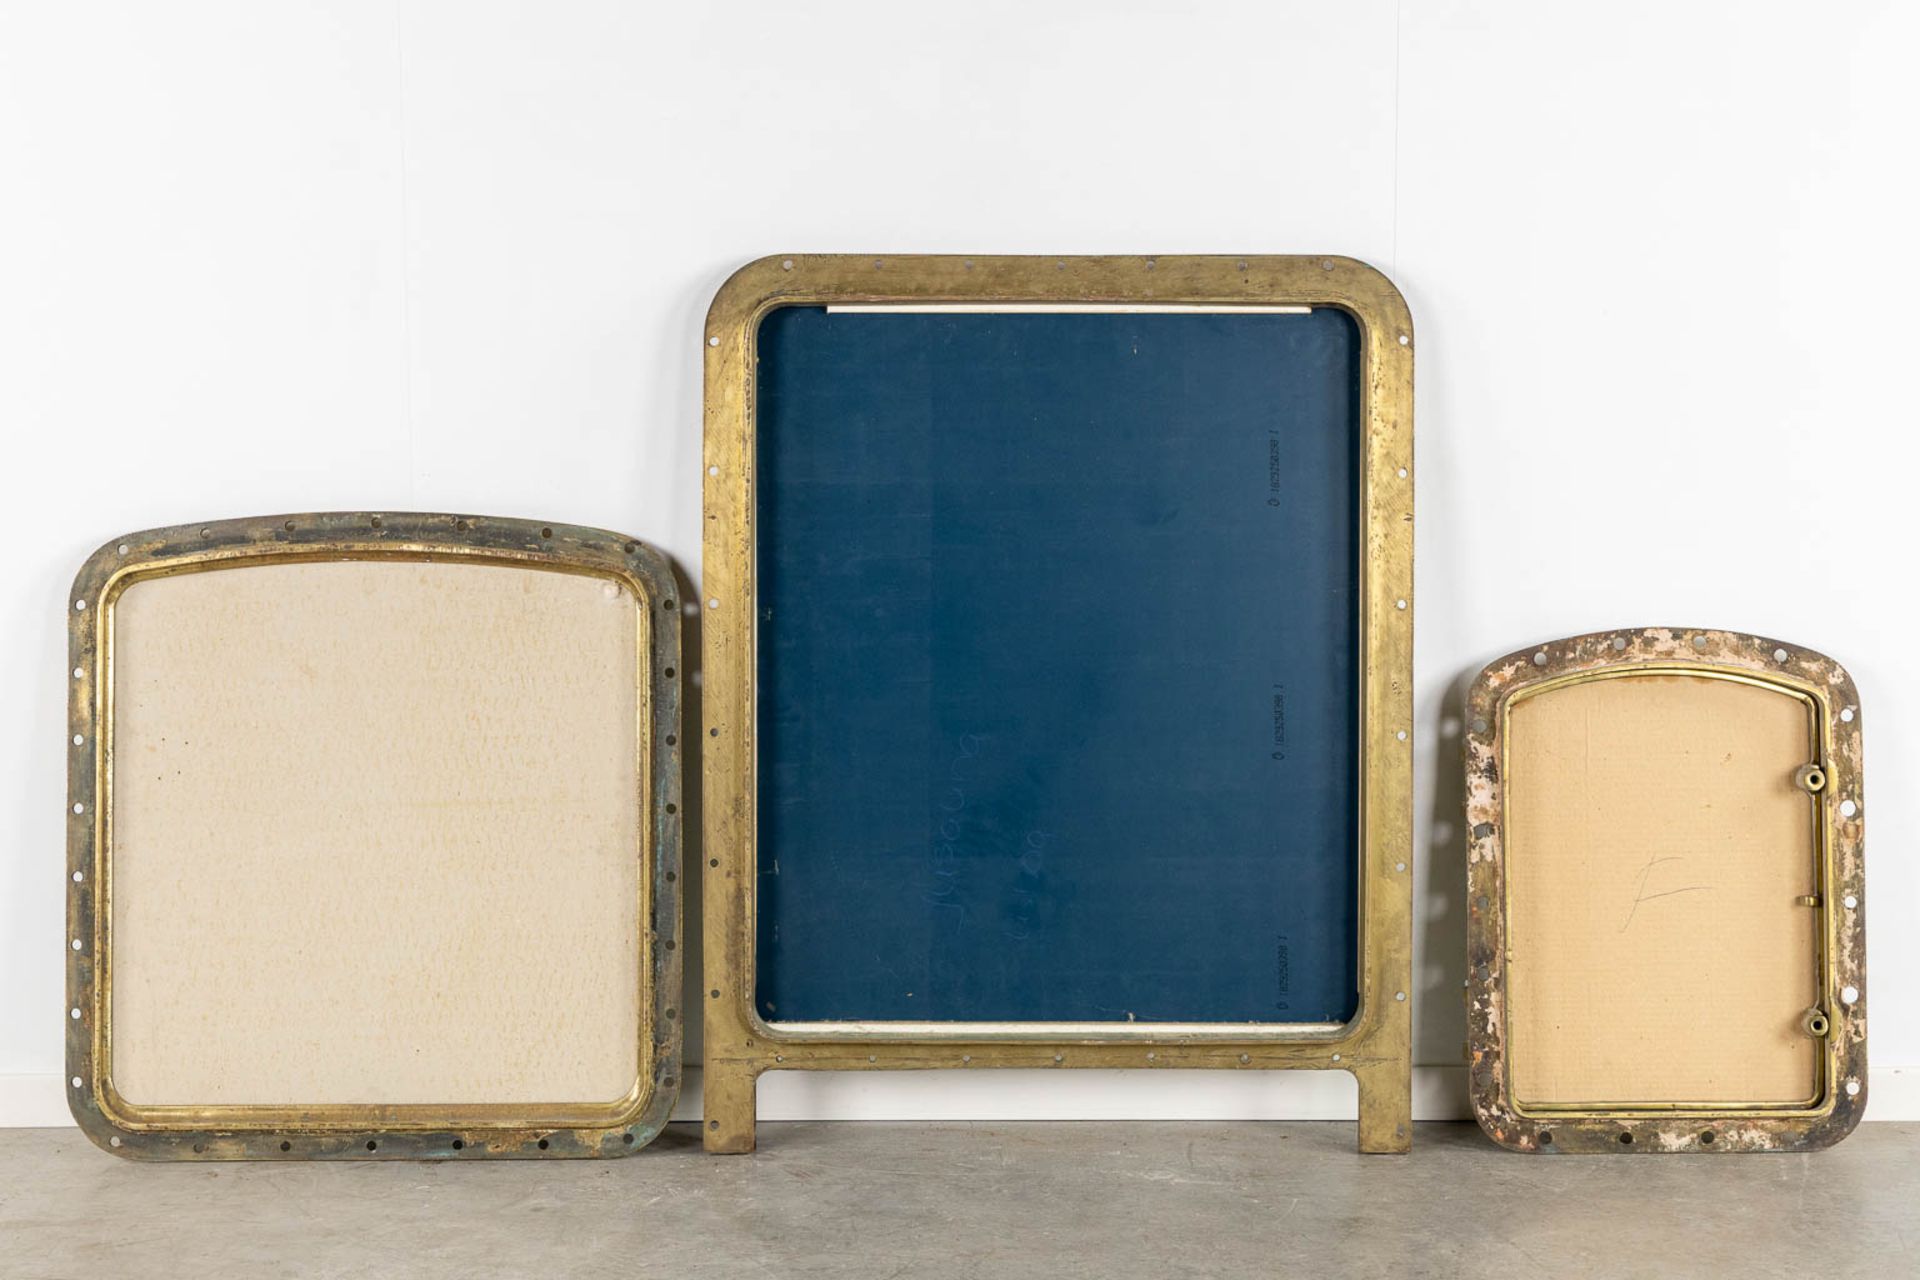 Three various Portholes, bronze and glass. Two changed into a mirror. (W:86 x H:110 cm) - Image 7 of 7